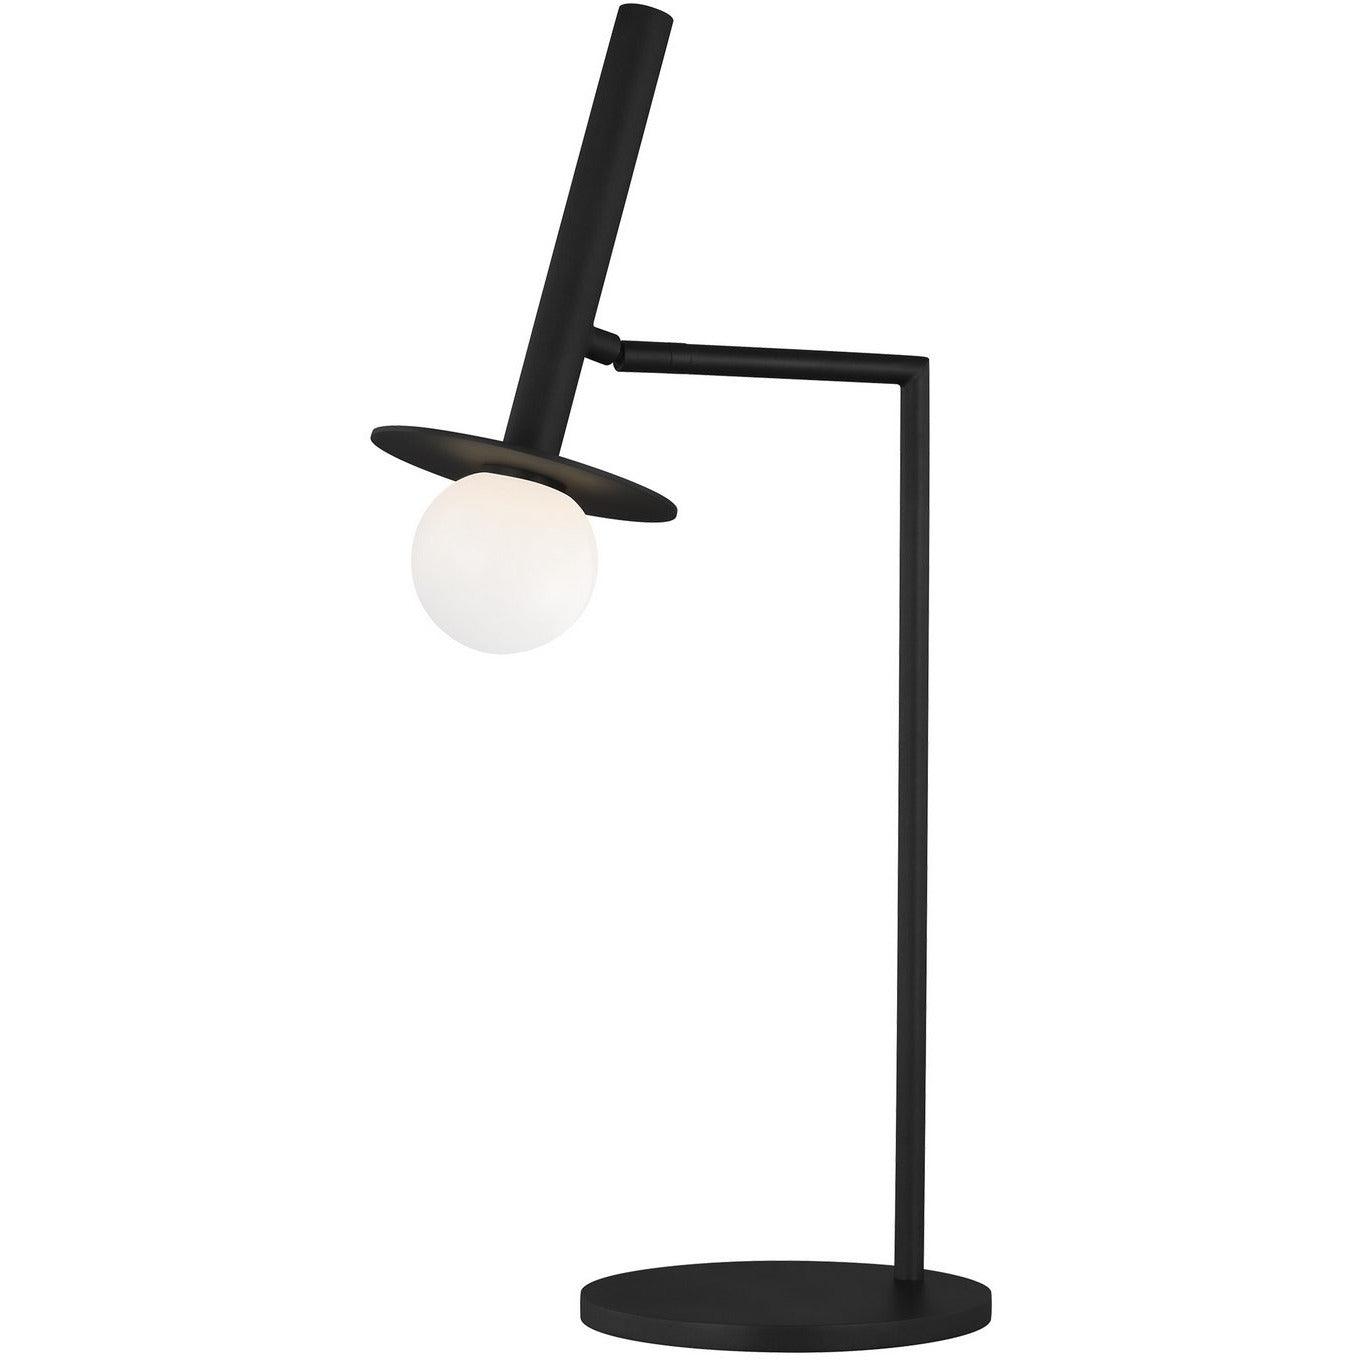 Visual Comfort Studio Collection - Nodes Table Lamp - KT1001MBK2 | Montreal Lighting & Hardware